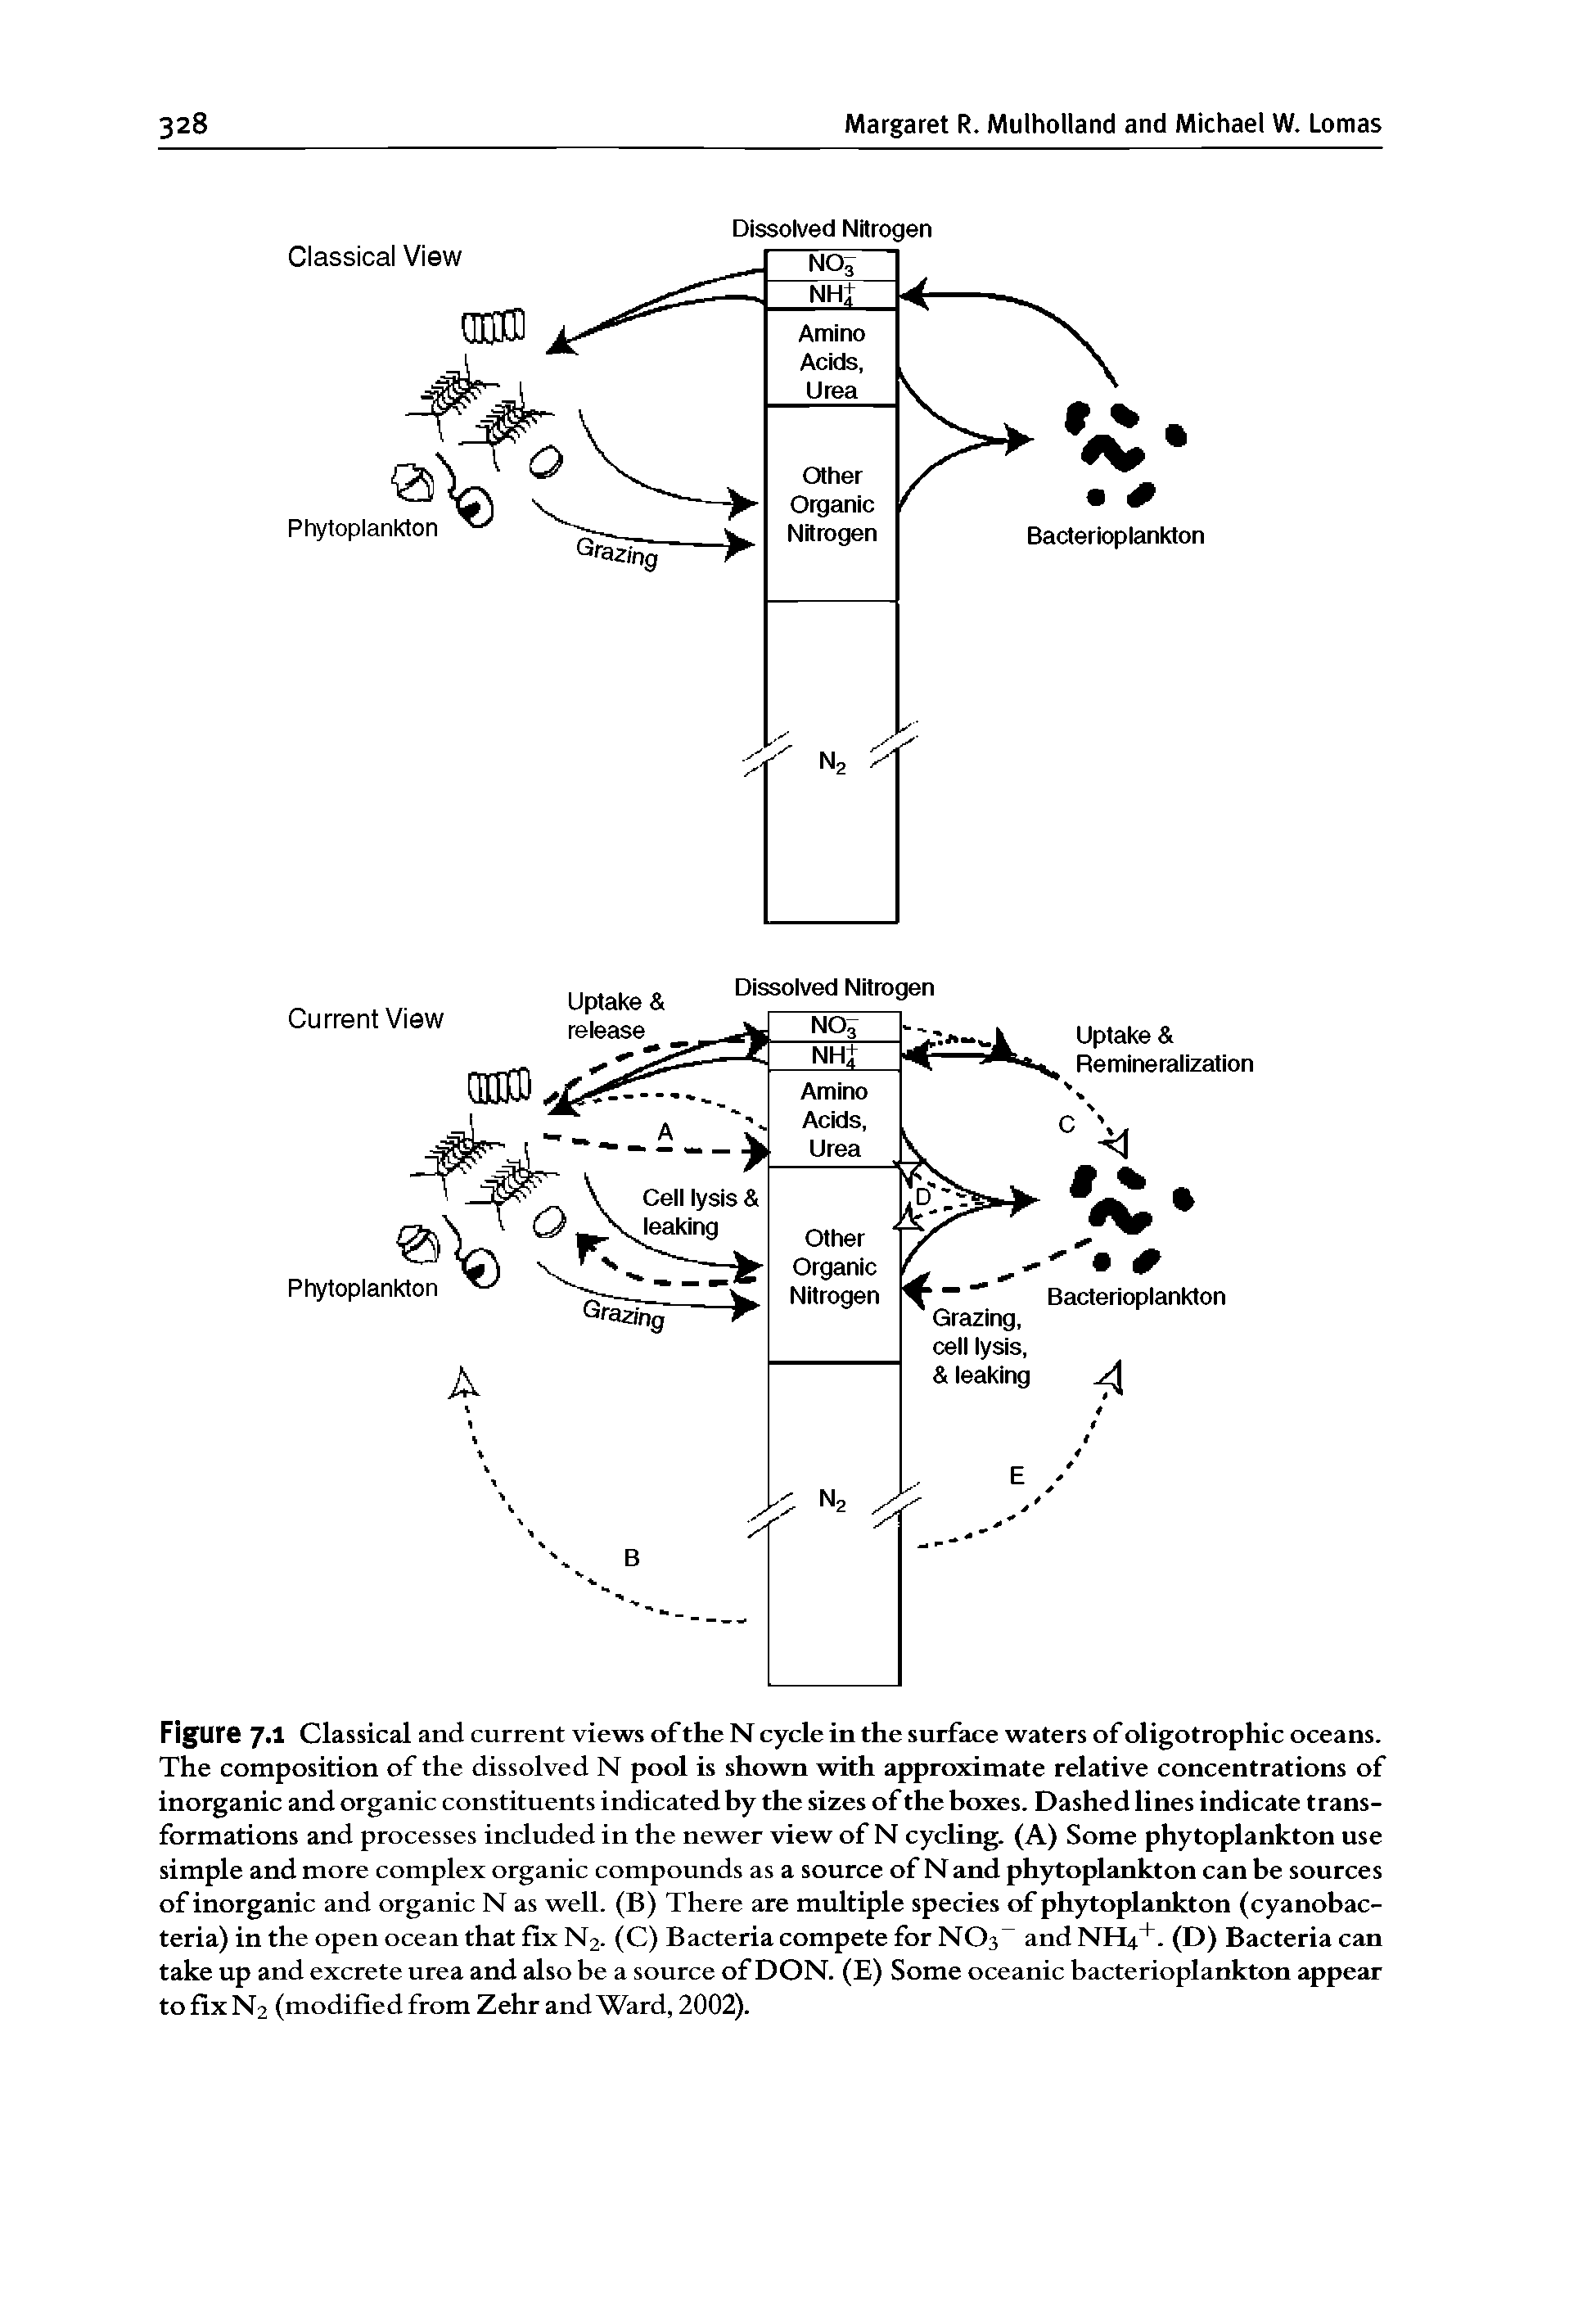 Figure 7.1 Classical and current views of the N cycle in the surface waters of oligotrophic oceans. The composition of the dissolved N pool is shown with approximate relative concentrations of inorganic and organic constituents indicated hy the sizes of the boxes. Dashed lines indicate transformations and processes included in the newer view of N cycling. (A) Some phytoplankton use simple and more complex organic compounds as a source of N and phytoplankton can he sources of inorganic and organic N as well. (B) There are multiple species of phytoplankton (cyanobacteria) in the open ocean that fix N2. (C) Bacteria compete for NOs and NH4+. (D) Bacteria can take up and excrete urea and also be a source of DON. (E) Some oceanic bacterioplankton appear to fix N2 (modified from Zehr and Ward, 2002).